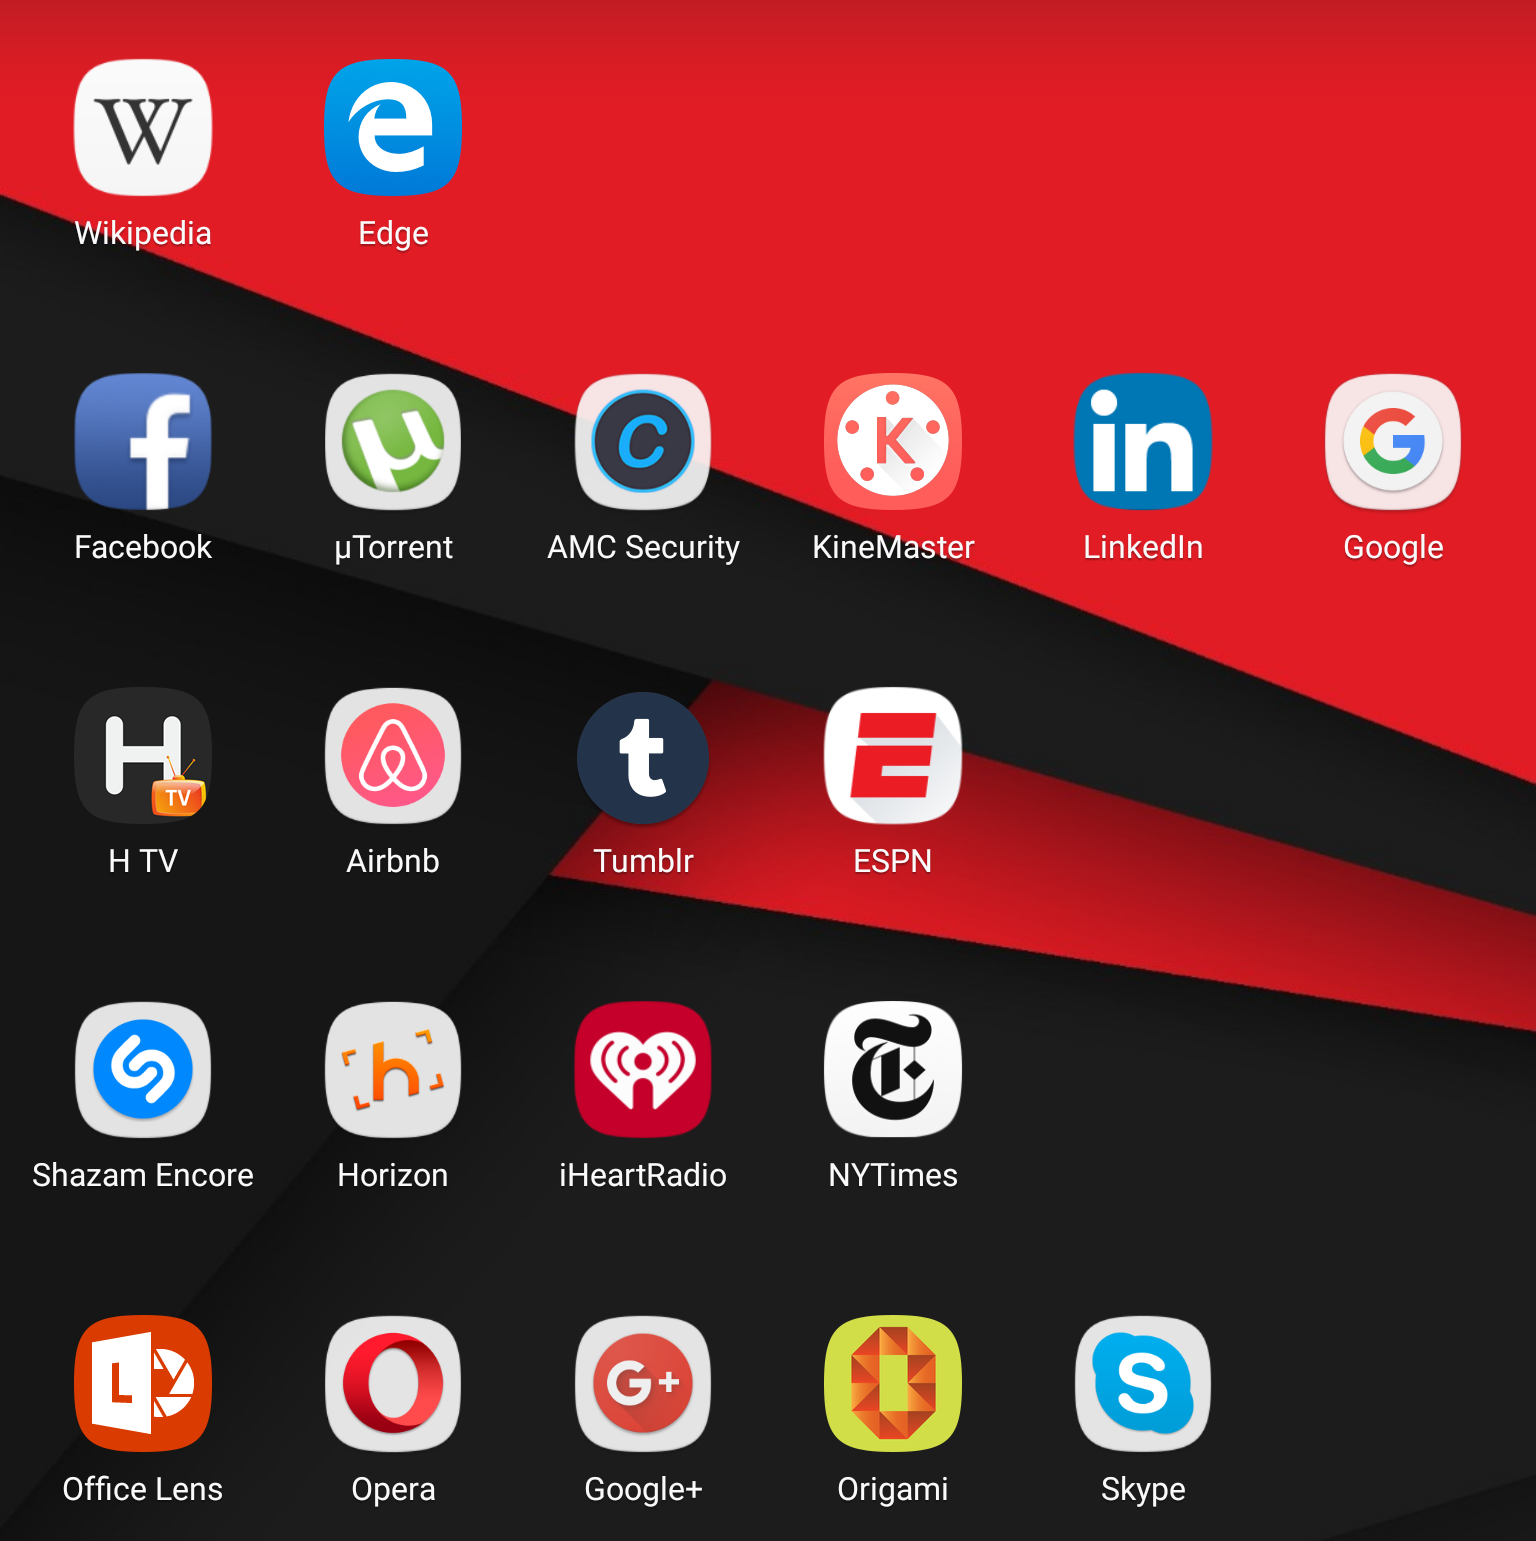 I noticed there were a lot of apps with lettered logos so... Speaks for itself.